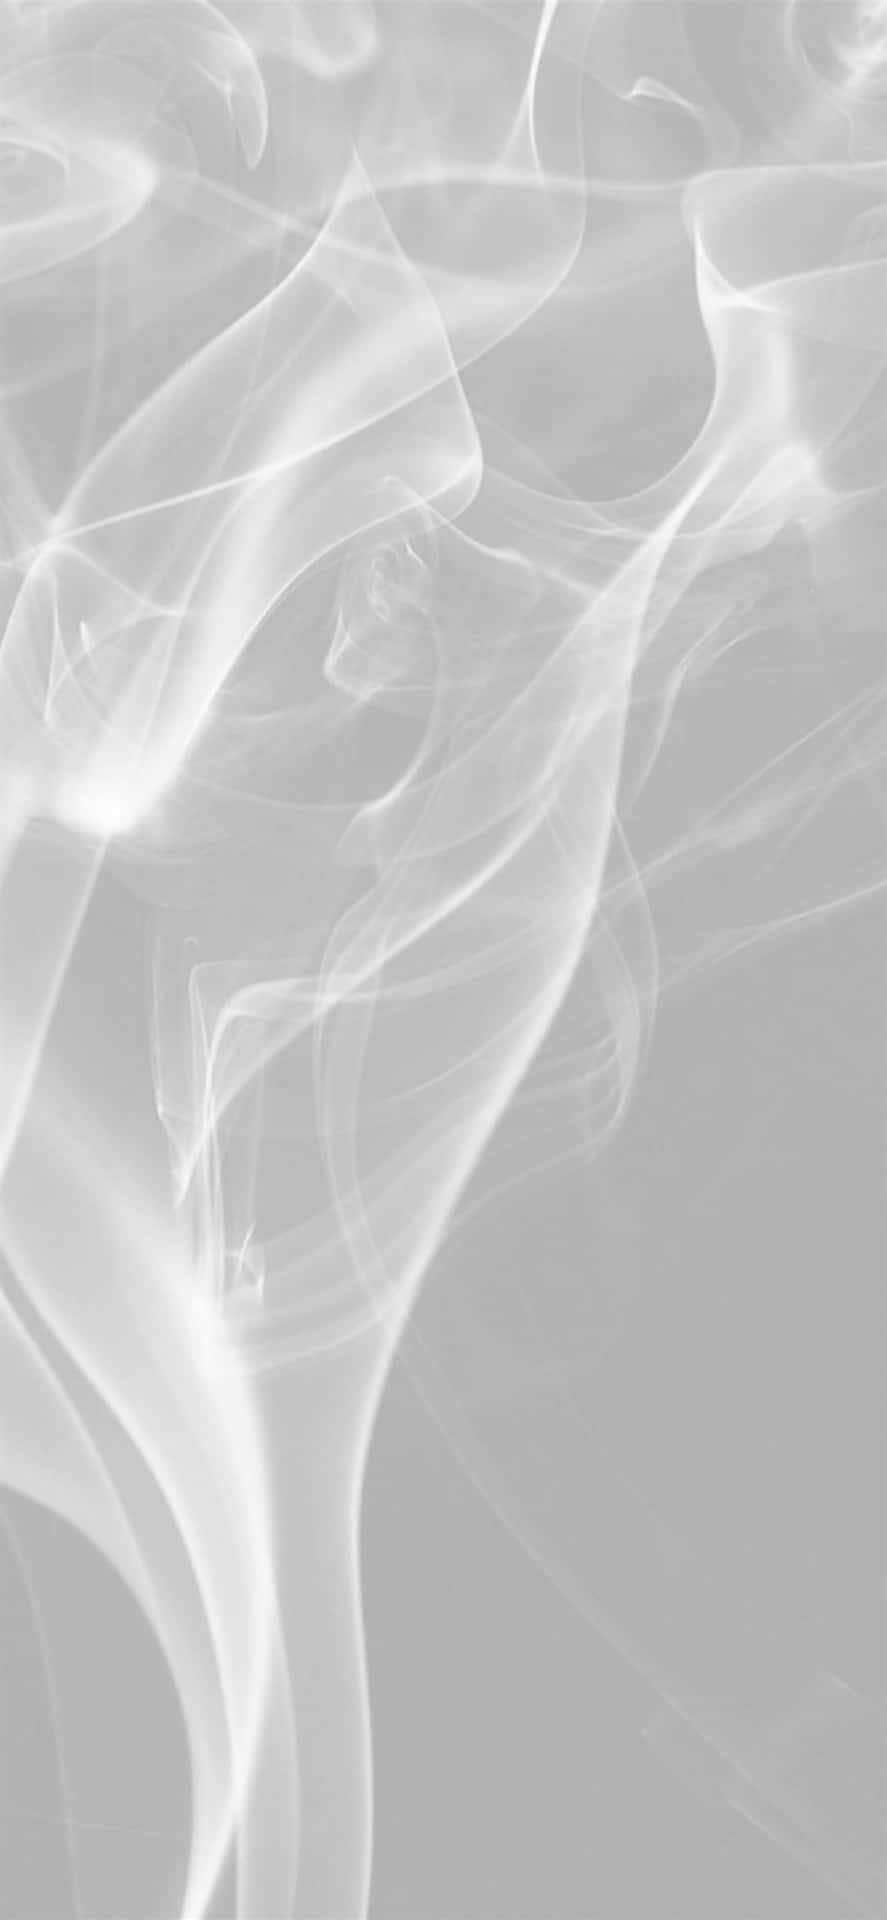 Shades of Elegance and Mystery - Smoky Background